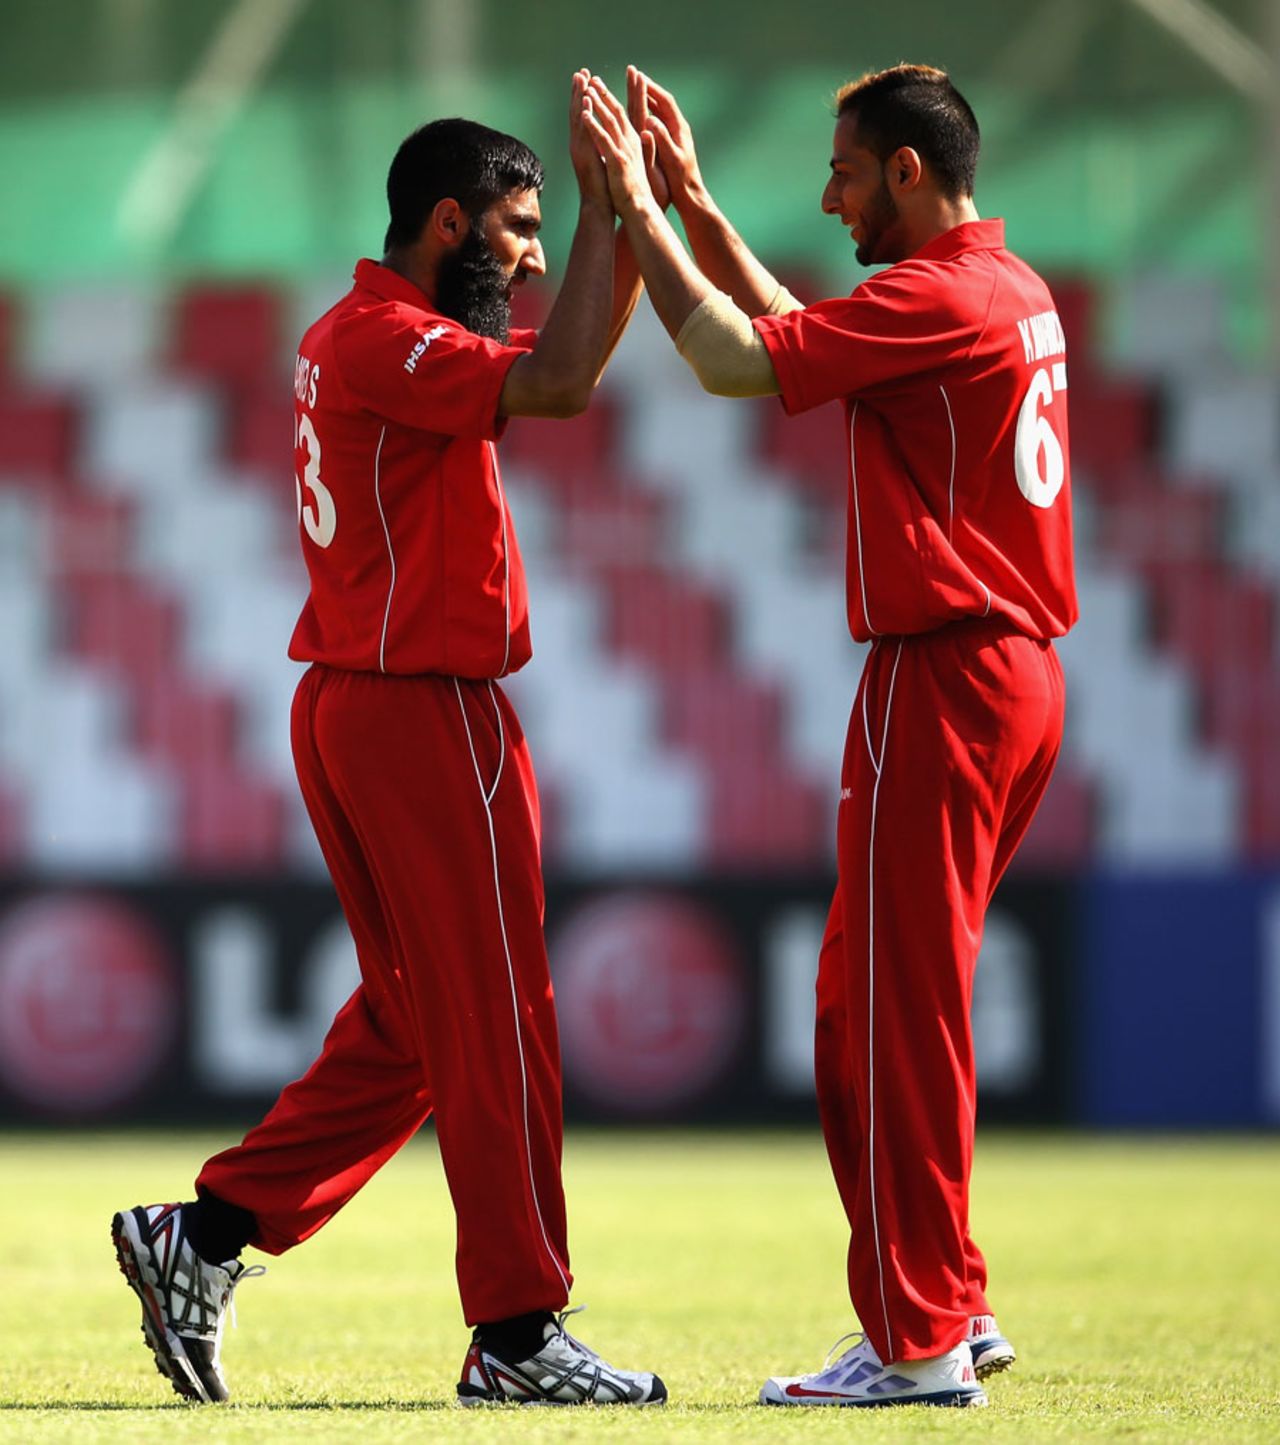 Hamid Shah finished with 3 for 20 in his four overs, United States of America v Denmark, ICC World Twenty20 Qualifier, 15th place play-off, Sharjah, November 26, 2013